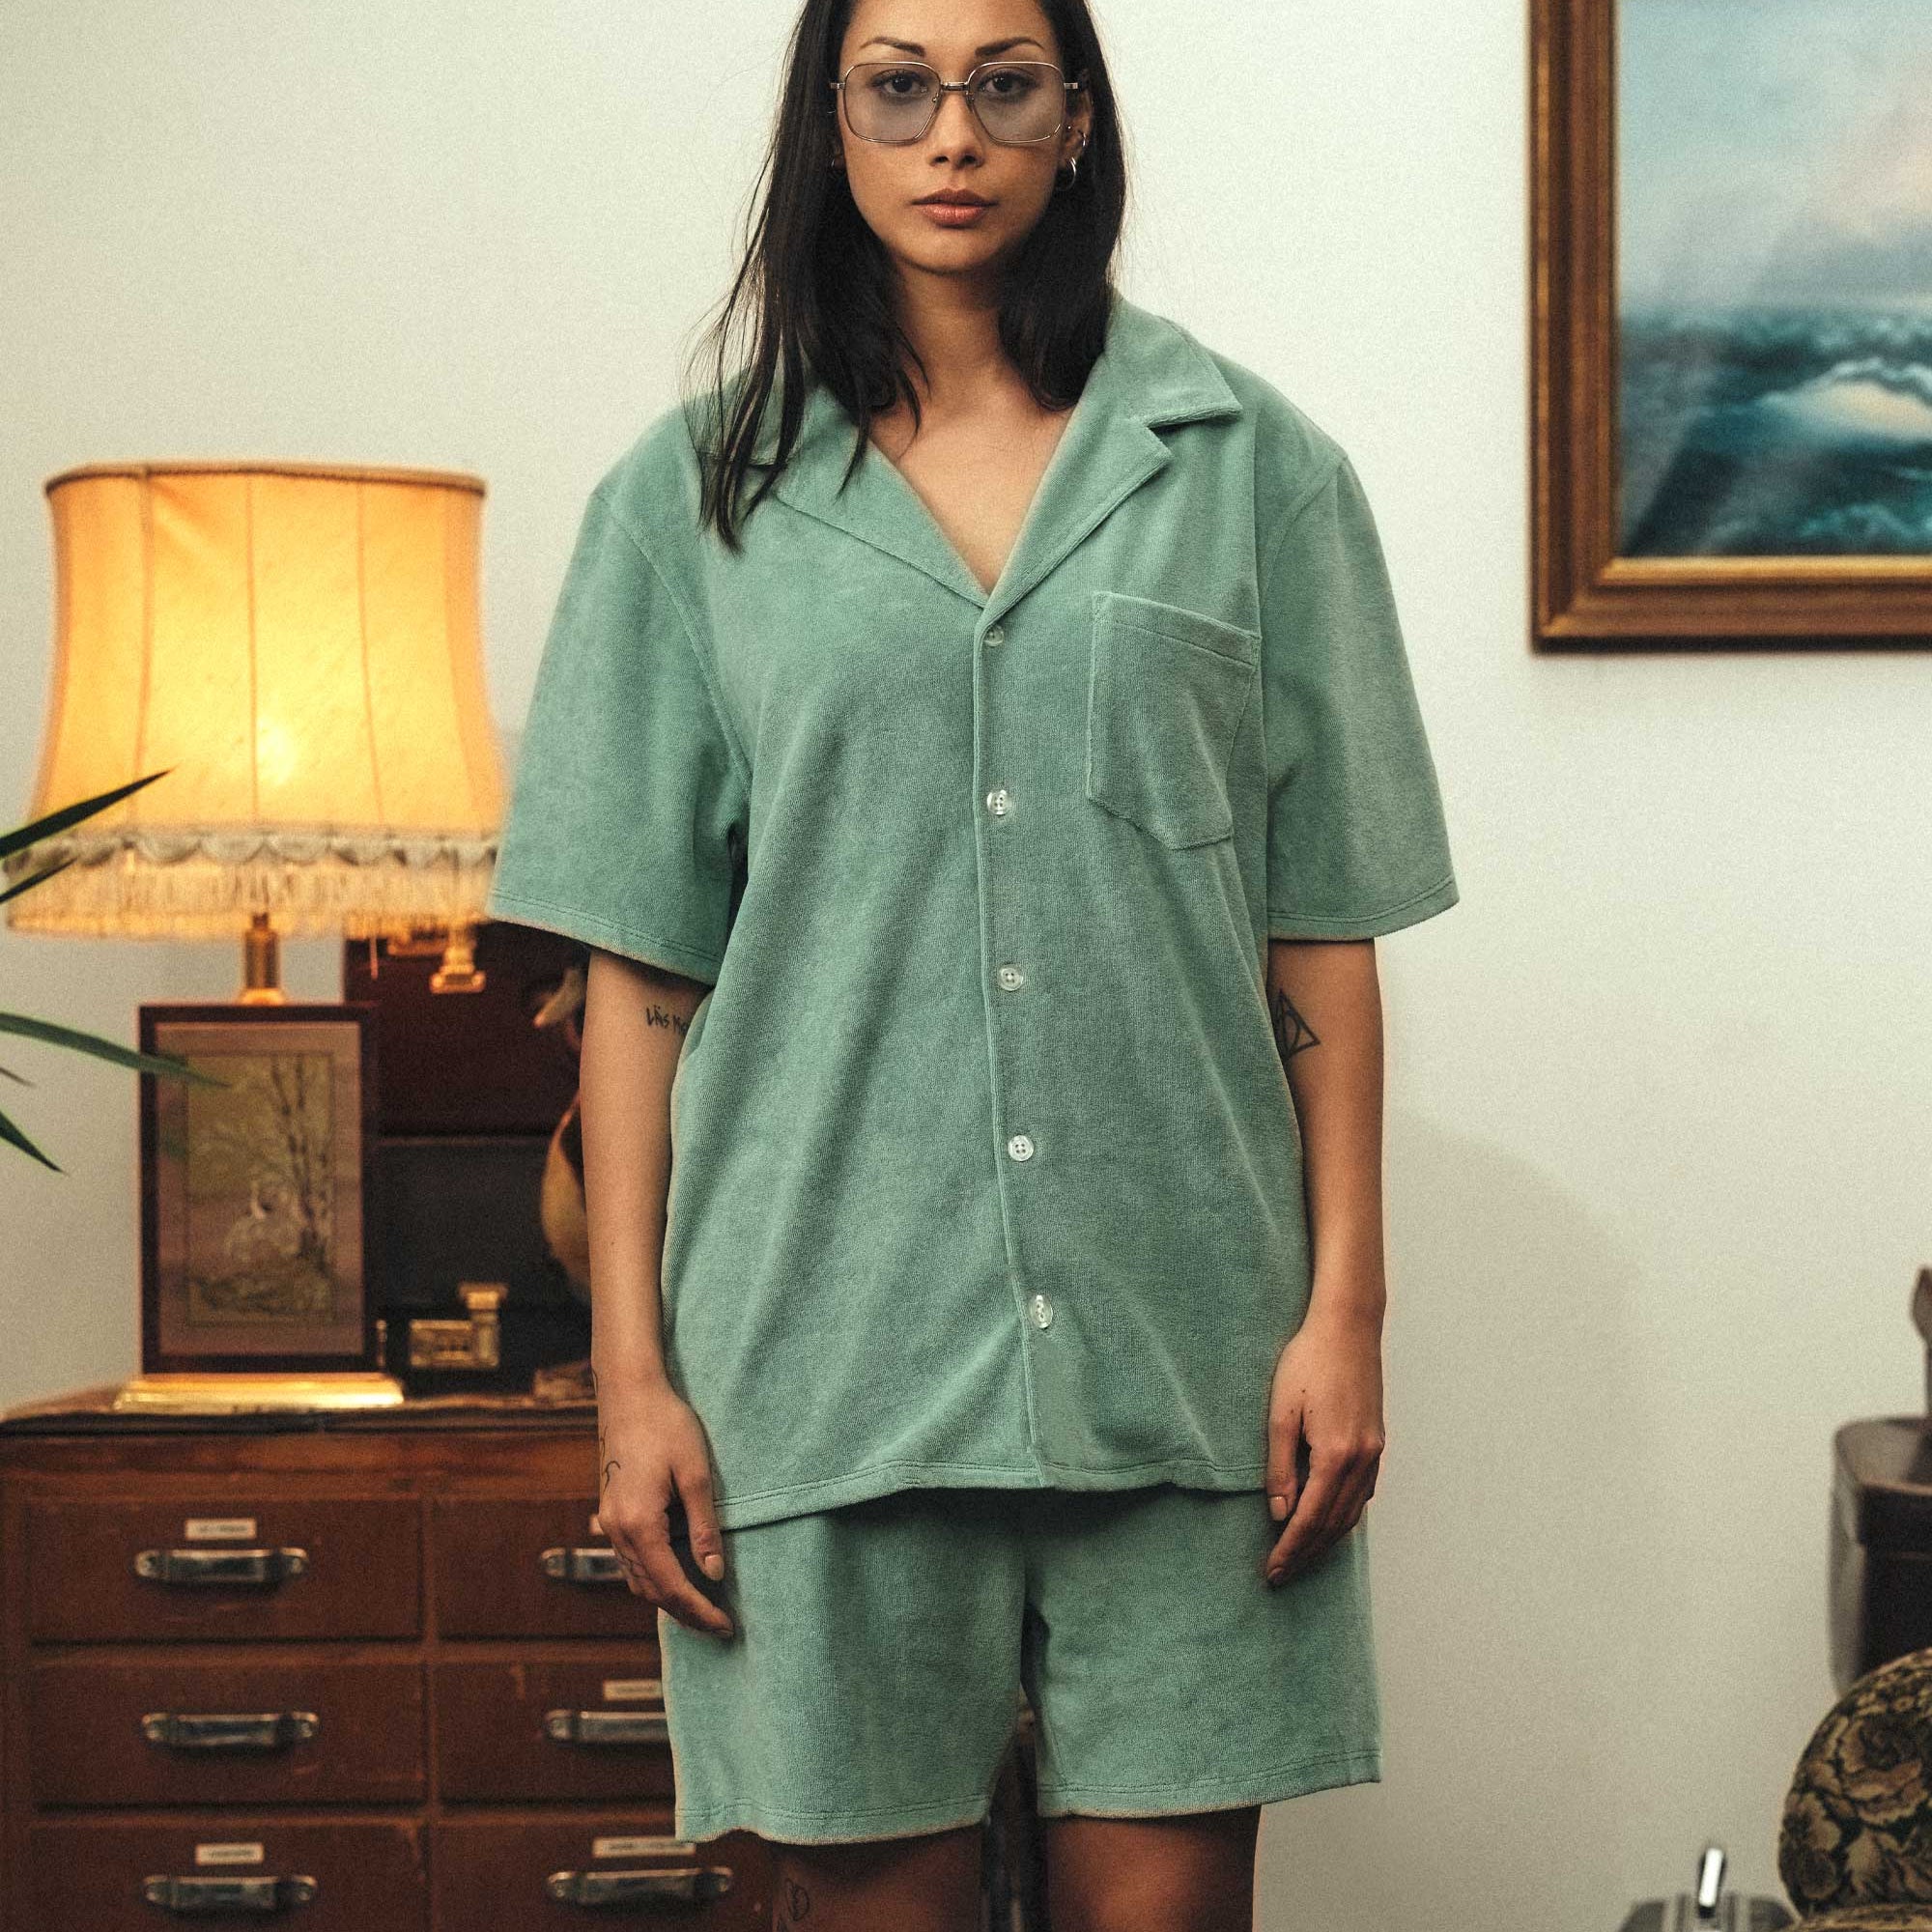 Female model wearing a grey-green short sleeve shirt with white button closure and one chest pocket